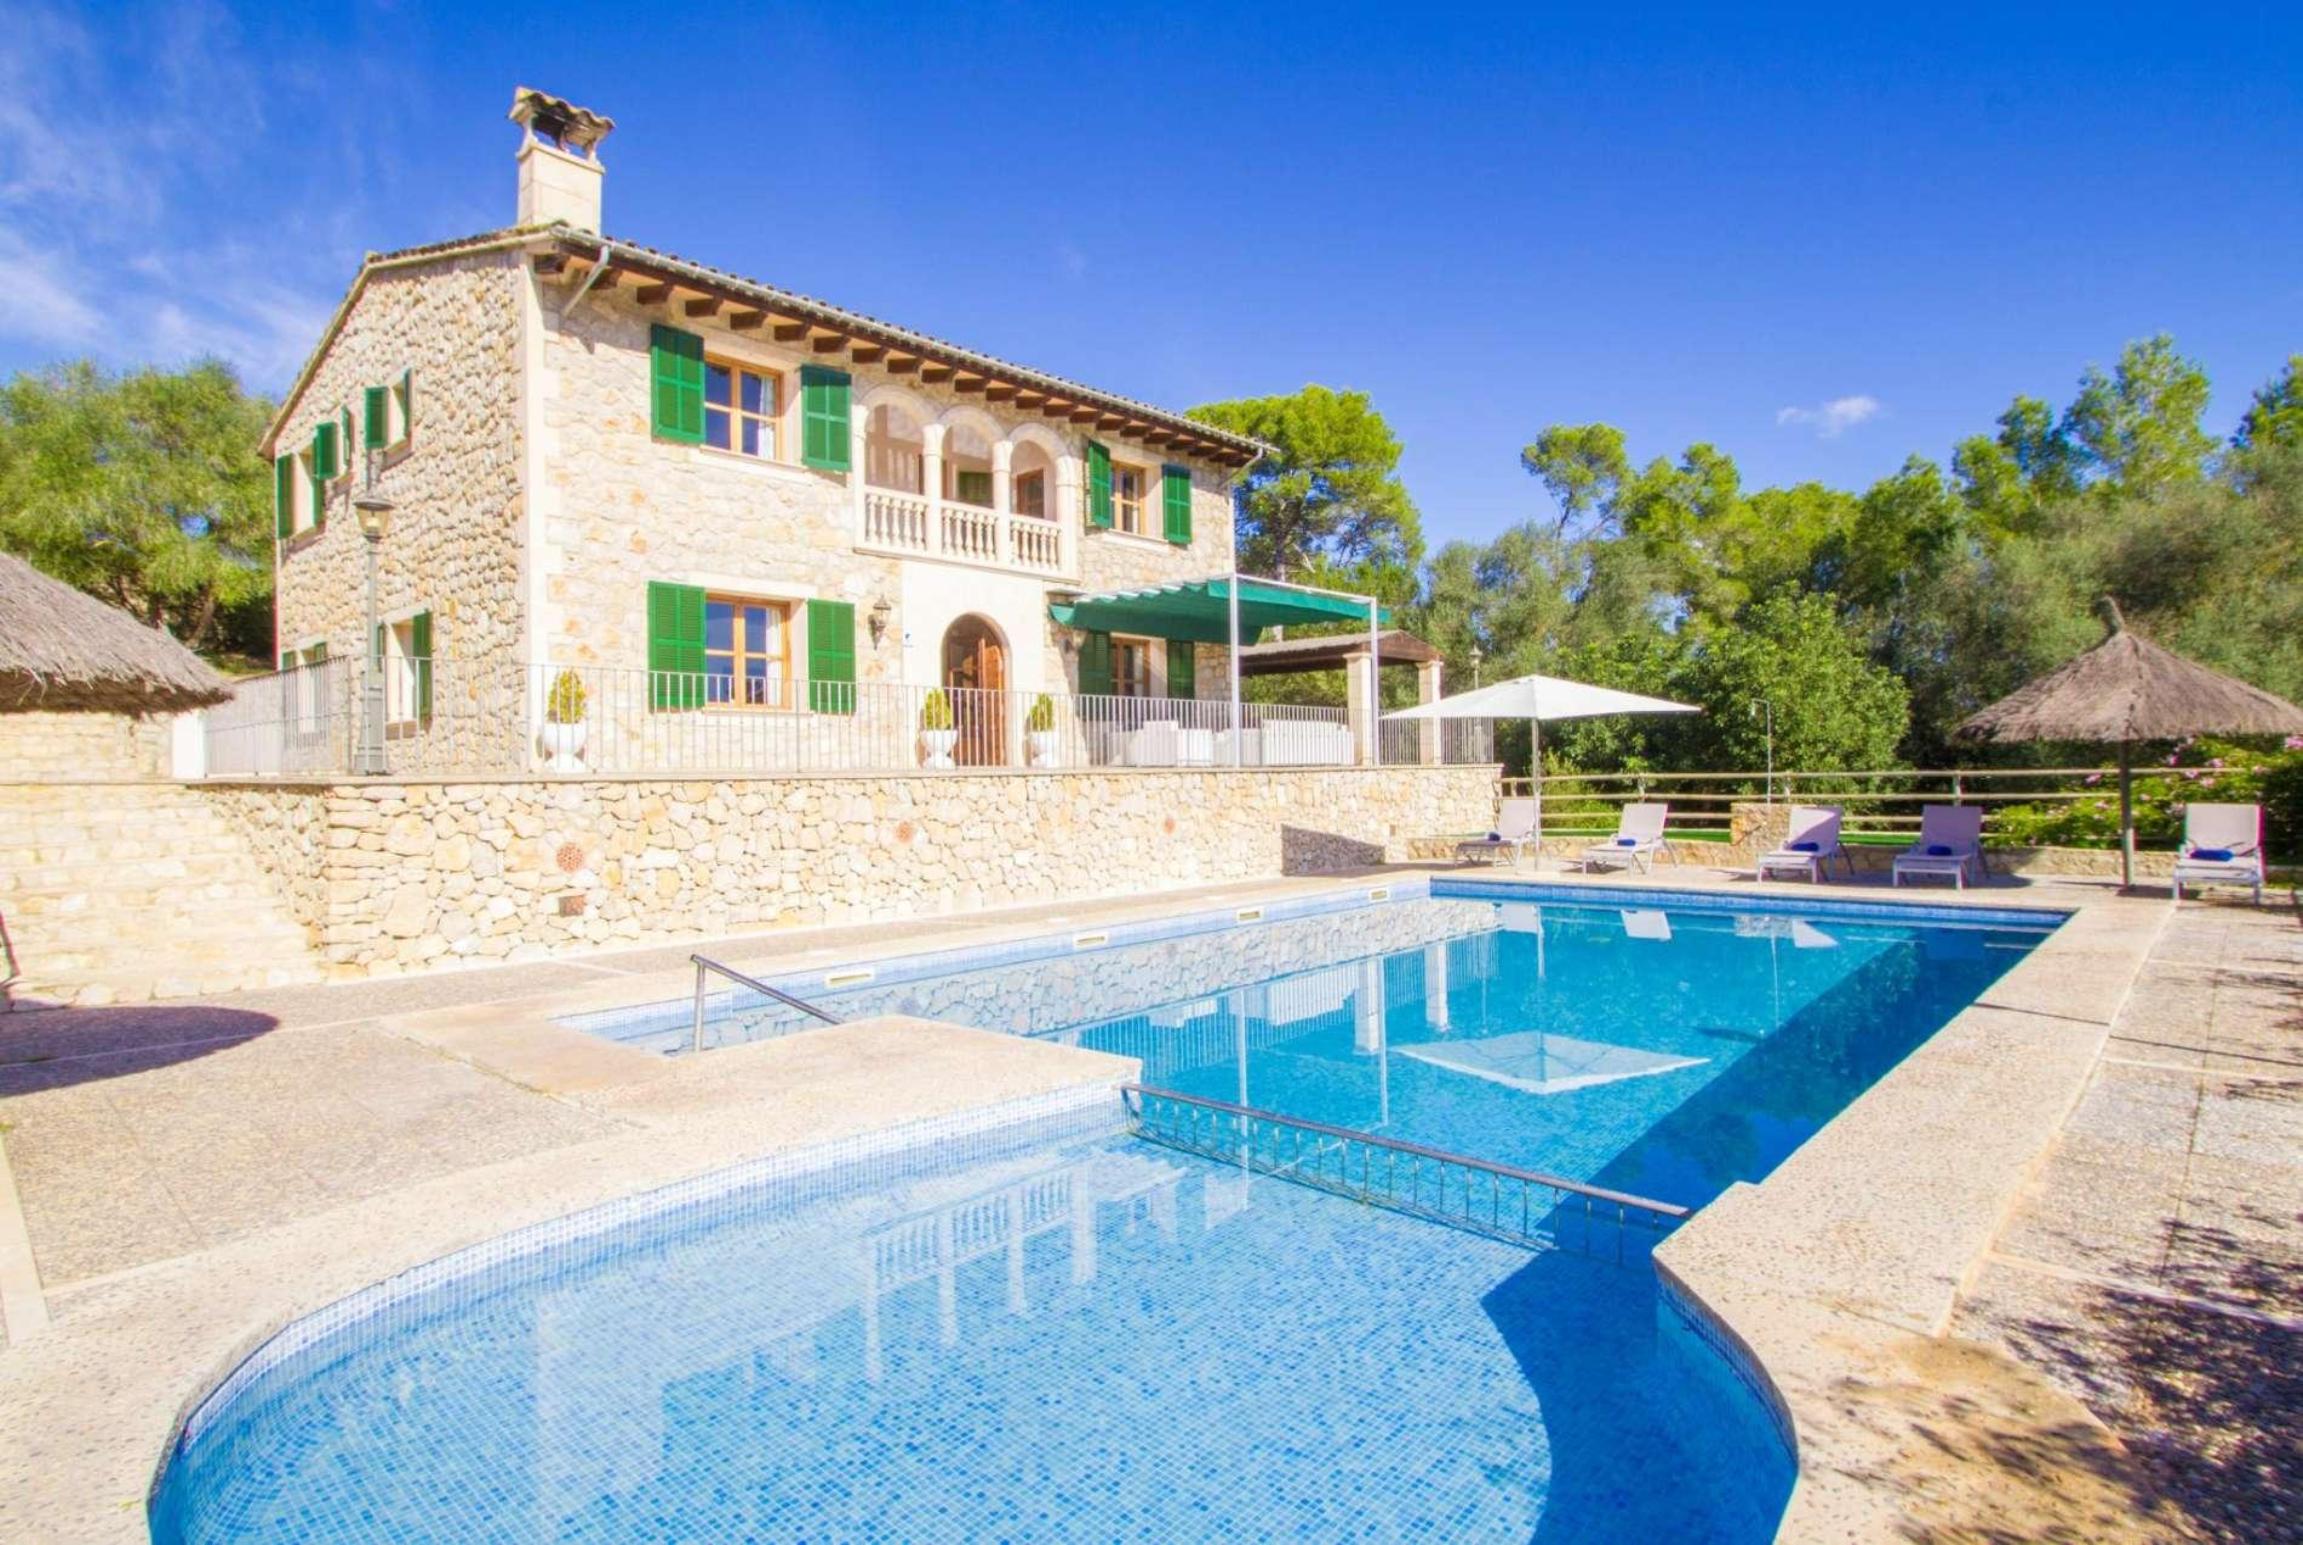 Property Image 2 - Villa with a large pool and fantastic views.